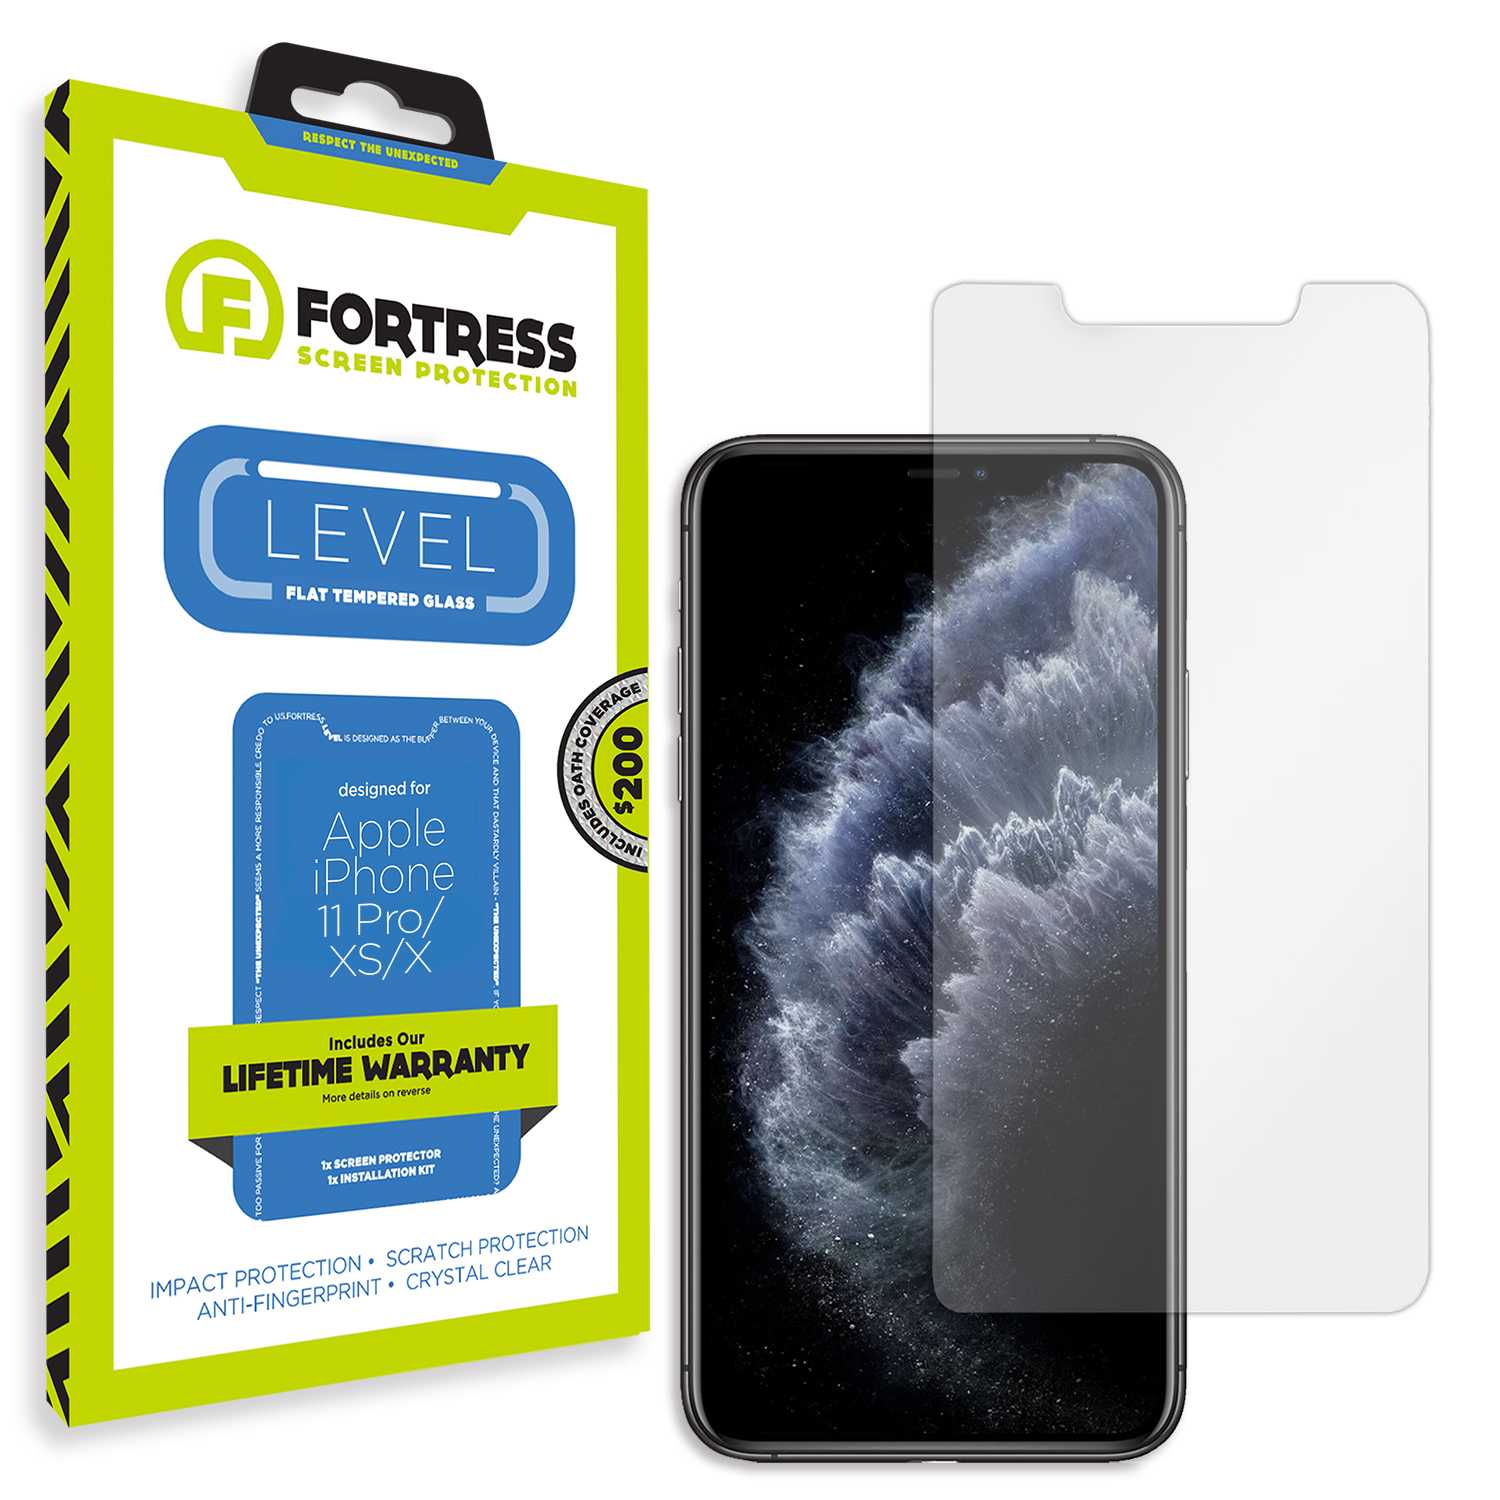 Fortress iPhone XS Screen Protector $200Coverage Scooch Screen Protector